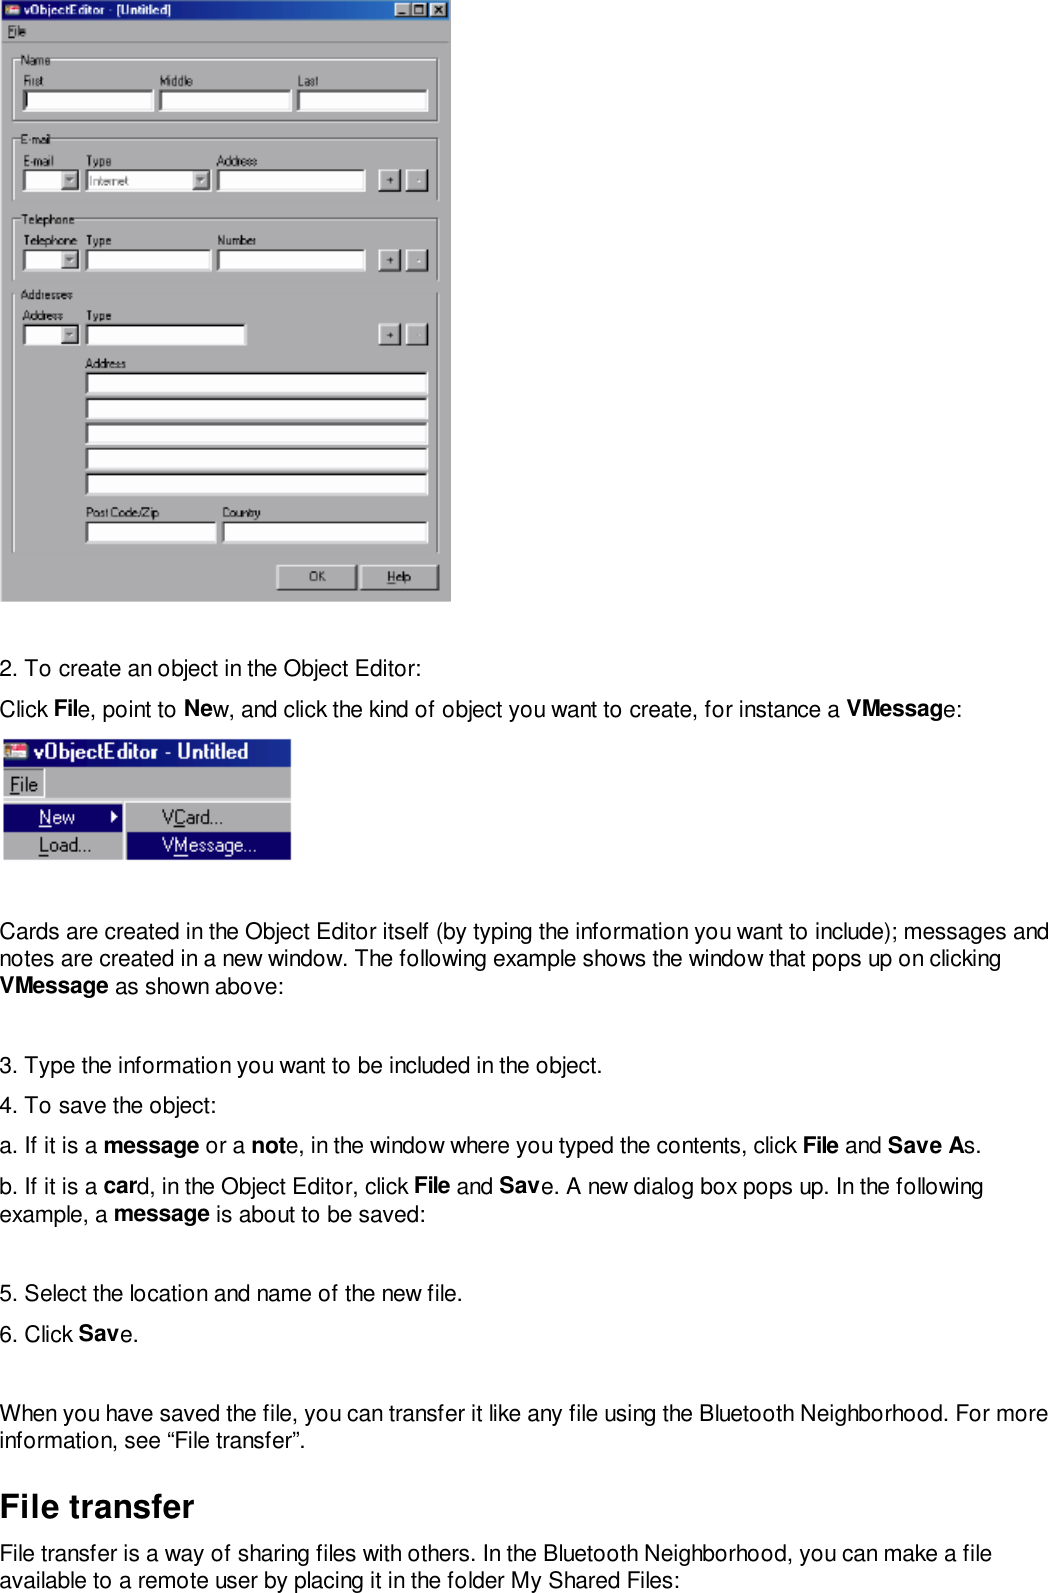 2. To create an object in the Object Editor:Click File, point to New, and click the kind of object you want to create, for instance a VMessage:Cards are created in the Object Editor itself (by typing the information you want to include); messages andnotes are created in a new window. The following example shows the window that pops up on clickingVMessage as shown above:3. Type the information you want to be included in the object.4. To save the object:a. If it is a message or a note, in the window where you typed the contents, click File and Save As.b. If it is a card, in the Object Editor, click File and Save. A new dialog box pops up. In the followingexample, a message is about to be saved:5. Select the location and name of the new file.6. Click Save.When you have saved the file, you can transfer it like any file using the Bluetooth Neighborhood. For moreinformation, see “File transfer”.File transferFile transfer is a way of sharing files with others. In the Bluetooth Neighborhood, you can make a fileavailable to a remote user by placing it in the folder My Shared Files: